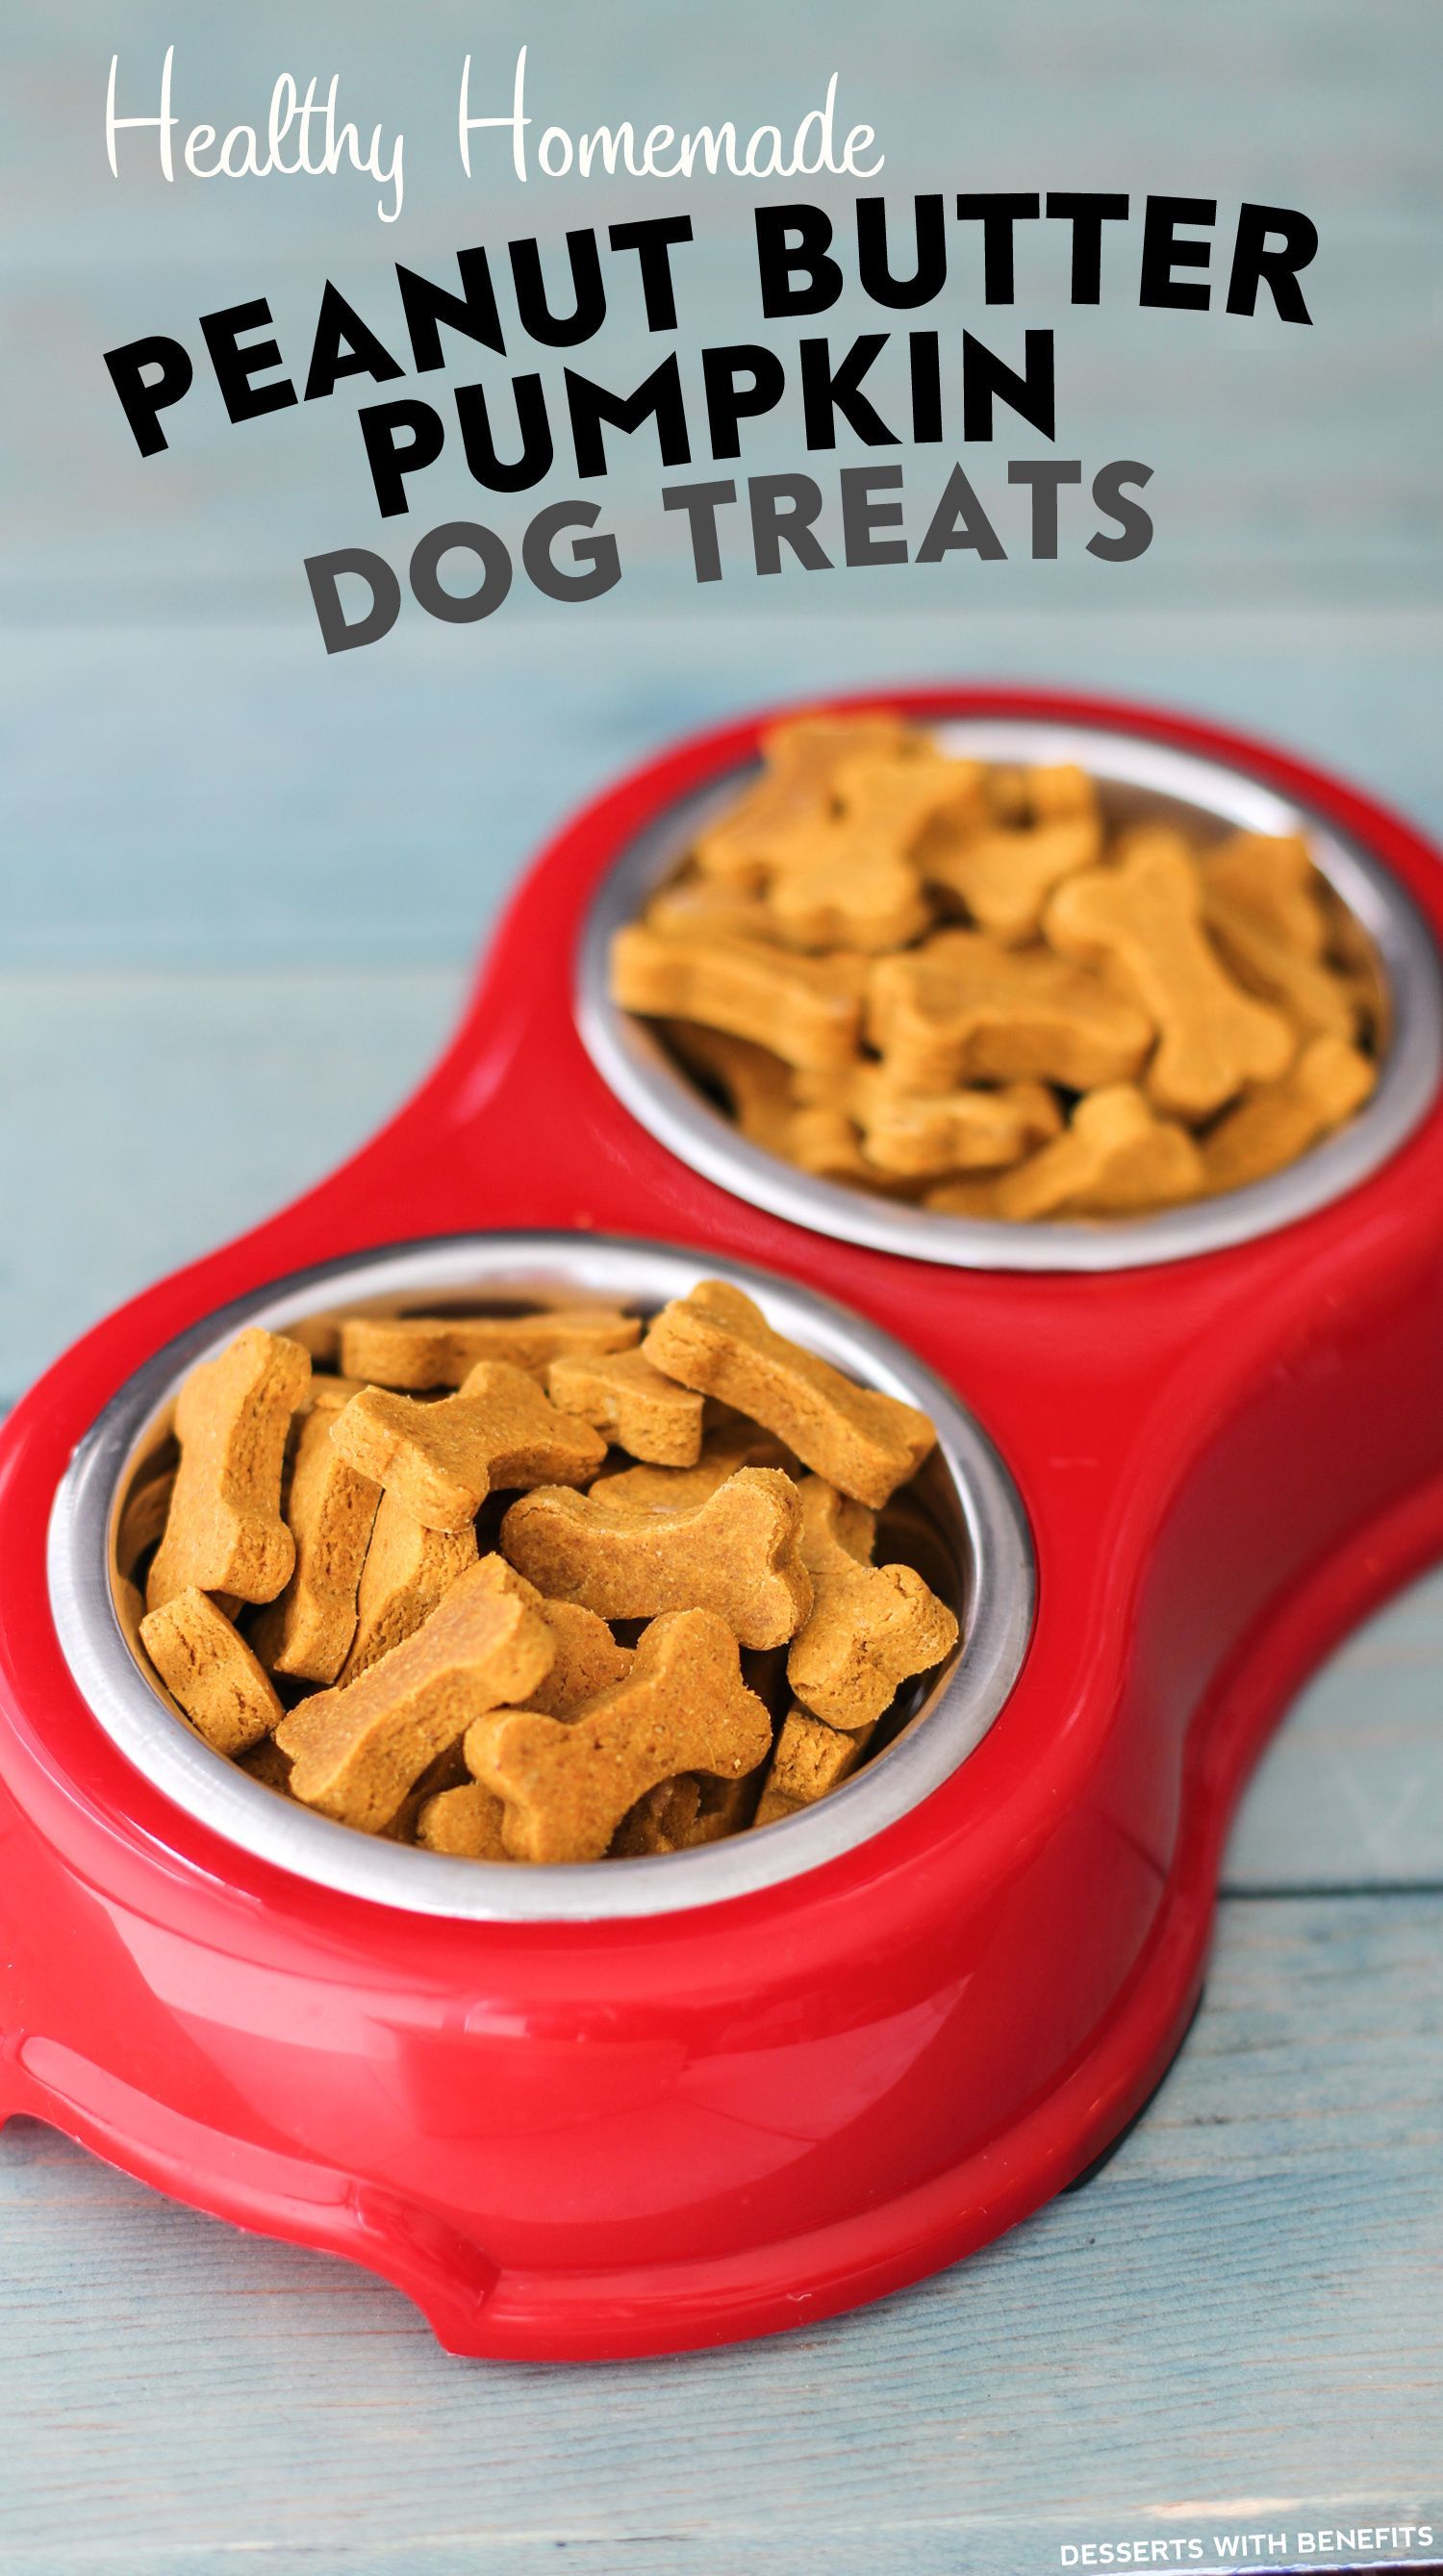 Healthy Homemade Peanut Butter Pumpkin Dog Treats! Puppy approved. These bone-shaped treats are packed